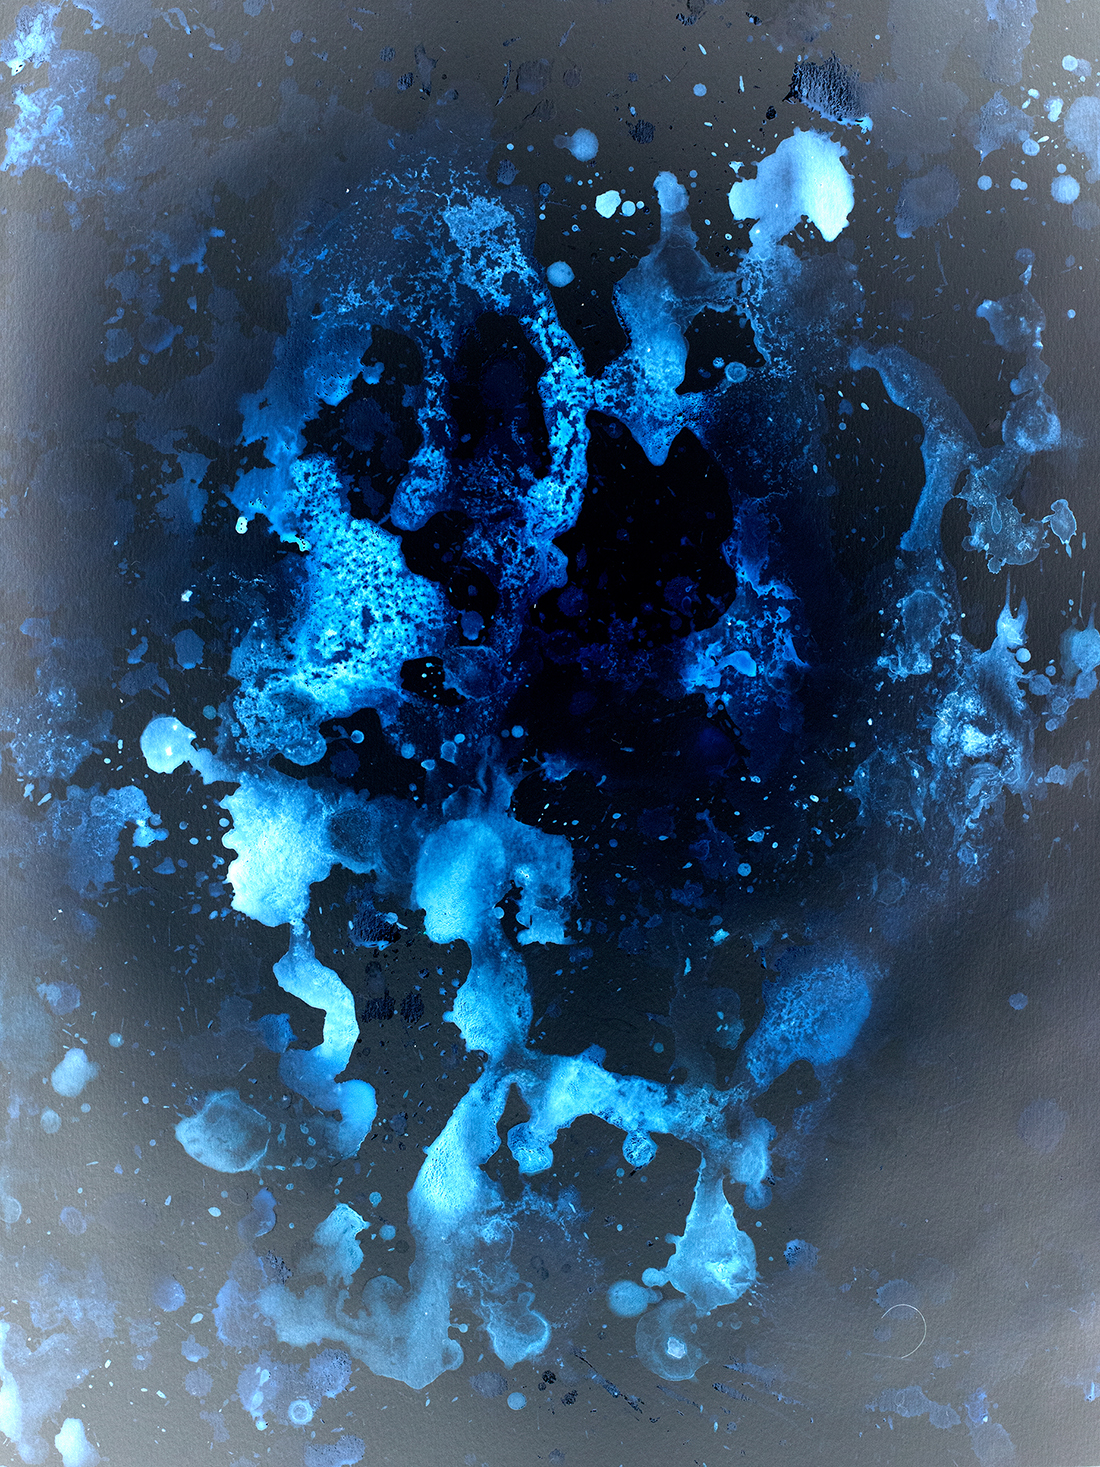 Copy of blue heart of the nebula (2013, pigment print, 48 in x 36 in) 